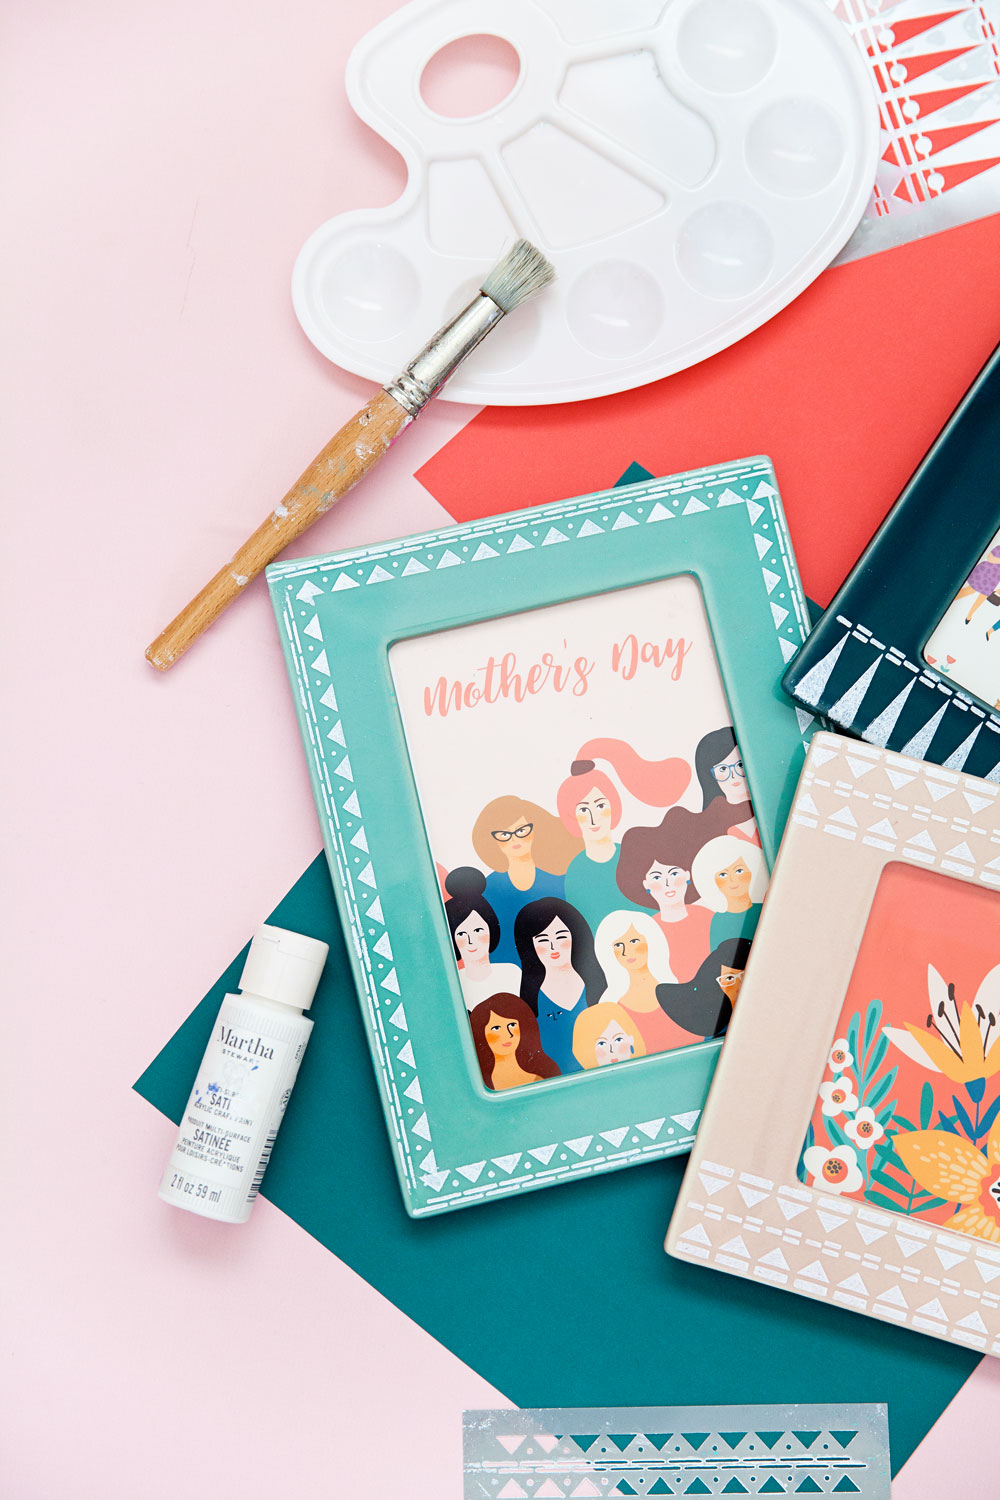 Make something meaningful this Mother's day with these DIY stenciled frames. So simple to make and perfect for holding any memory or keepsake.